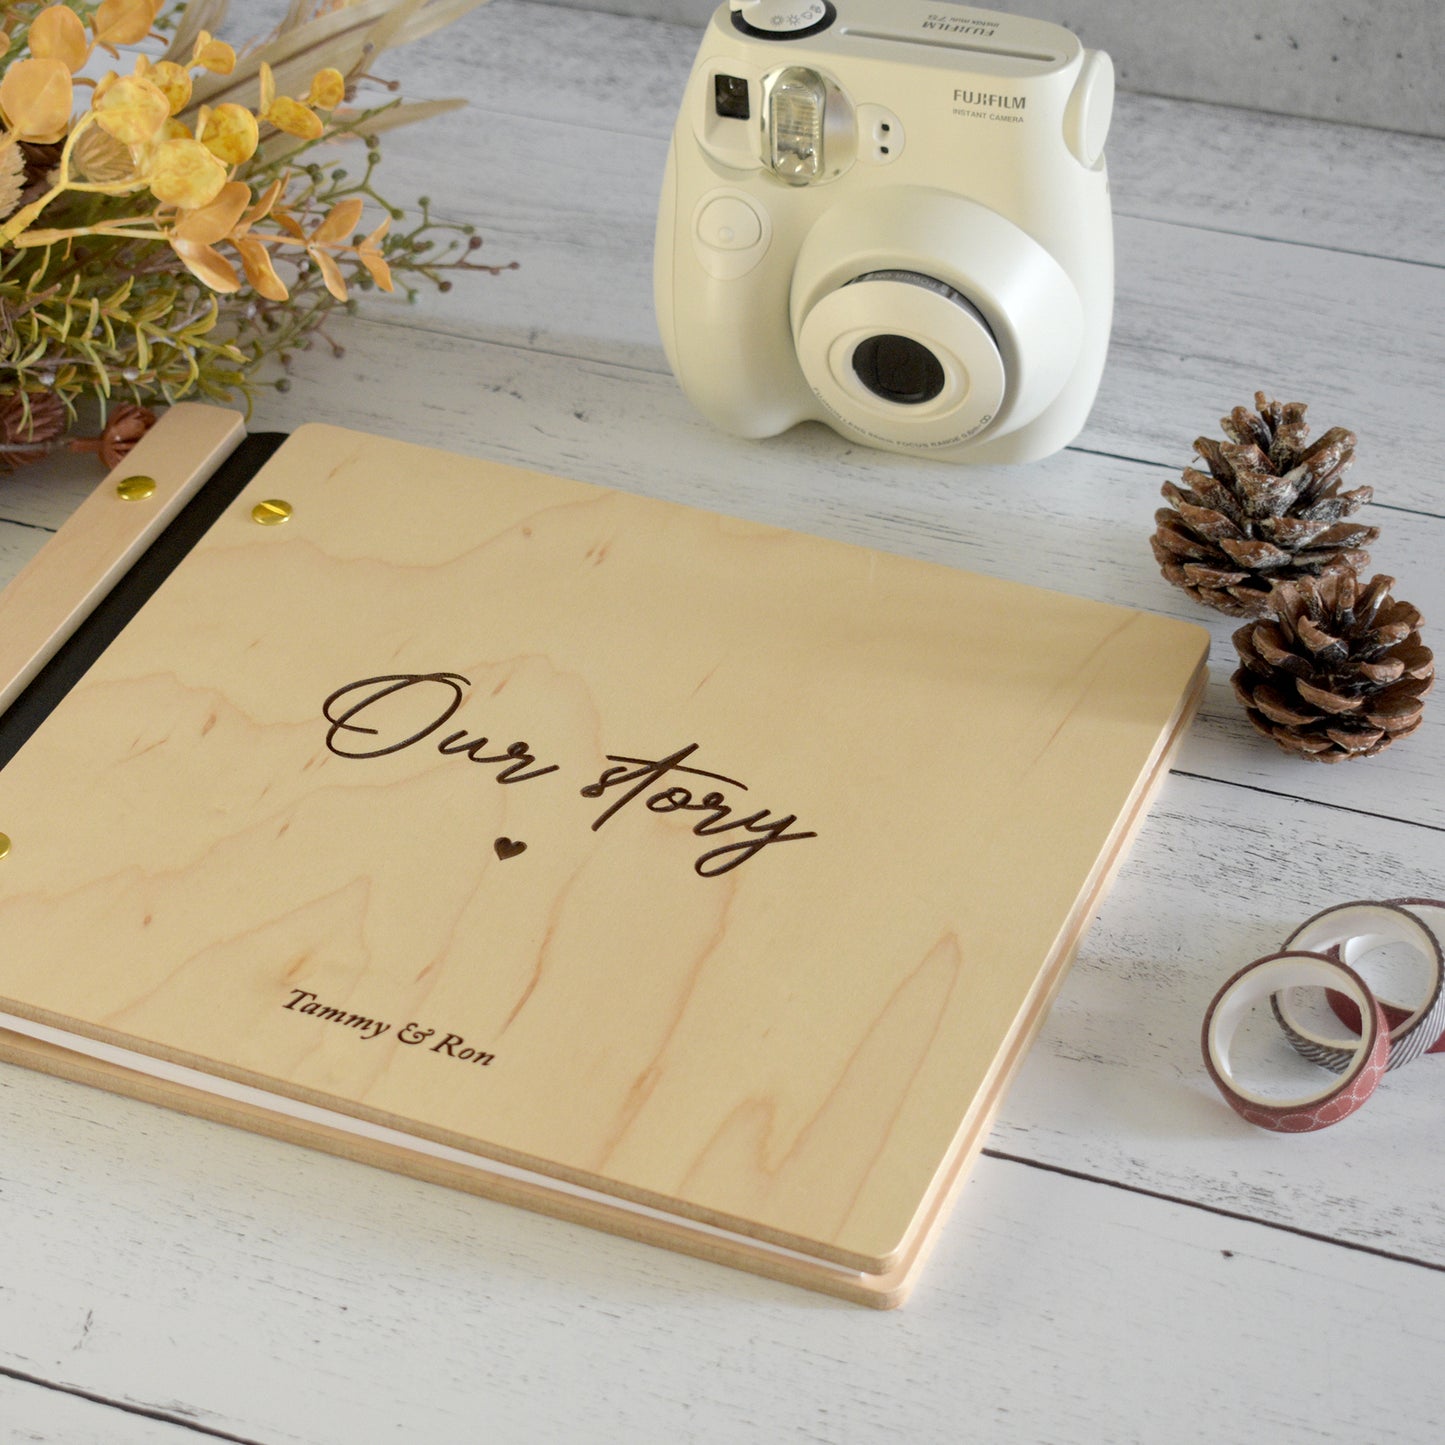 An 8.5x11" guest book lies on a table. Made of maple wood, black vegan leather binding, and gold hardware. The front cover reads “Our Story, Ron & Tammy.”